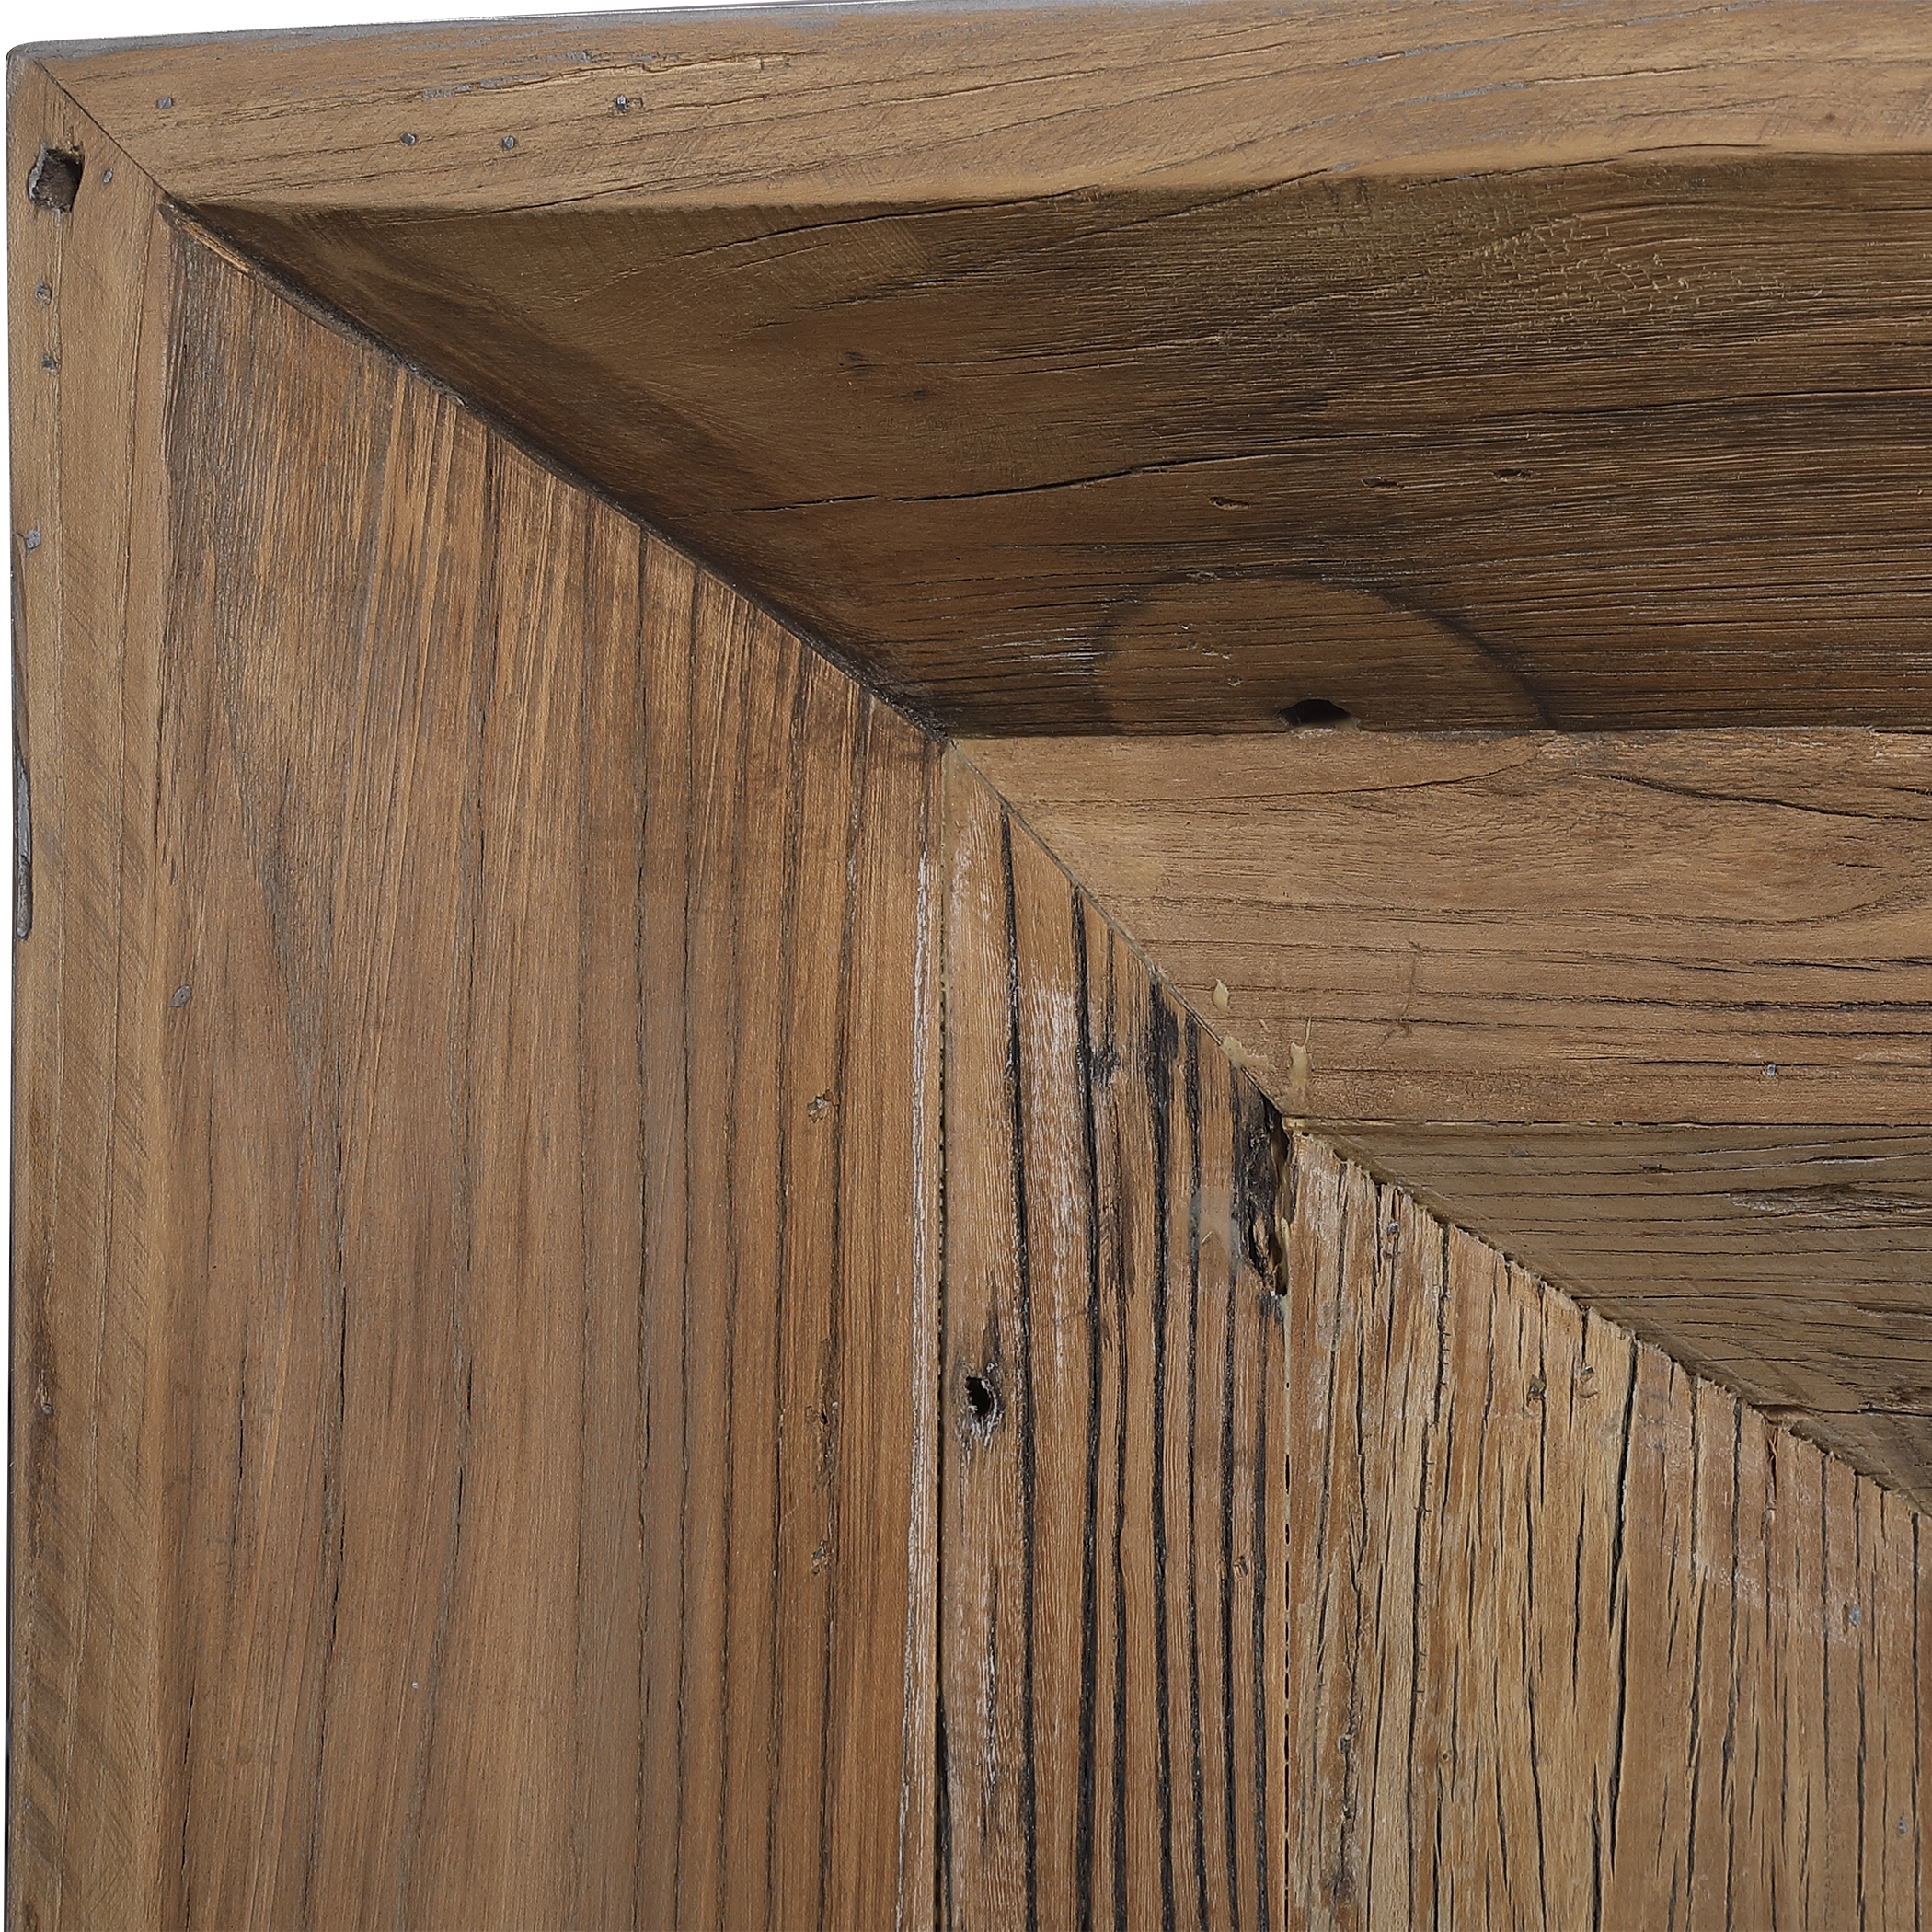 Vail Reclaimed Wood Console Table - Image 4